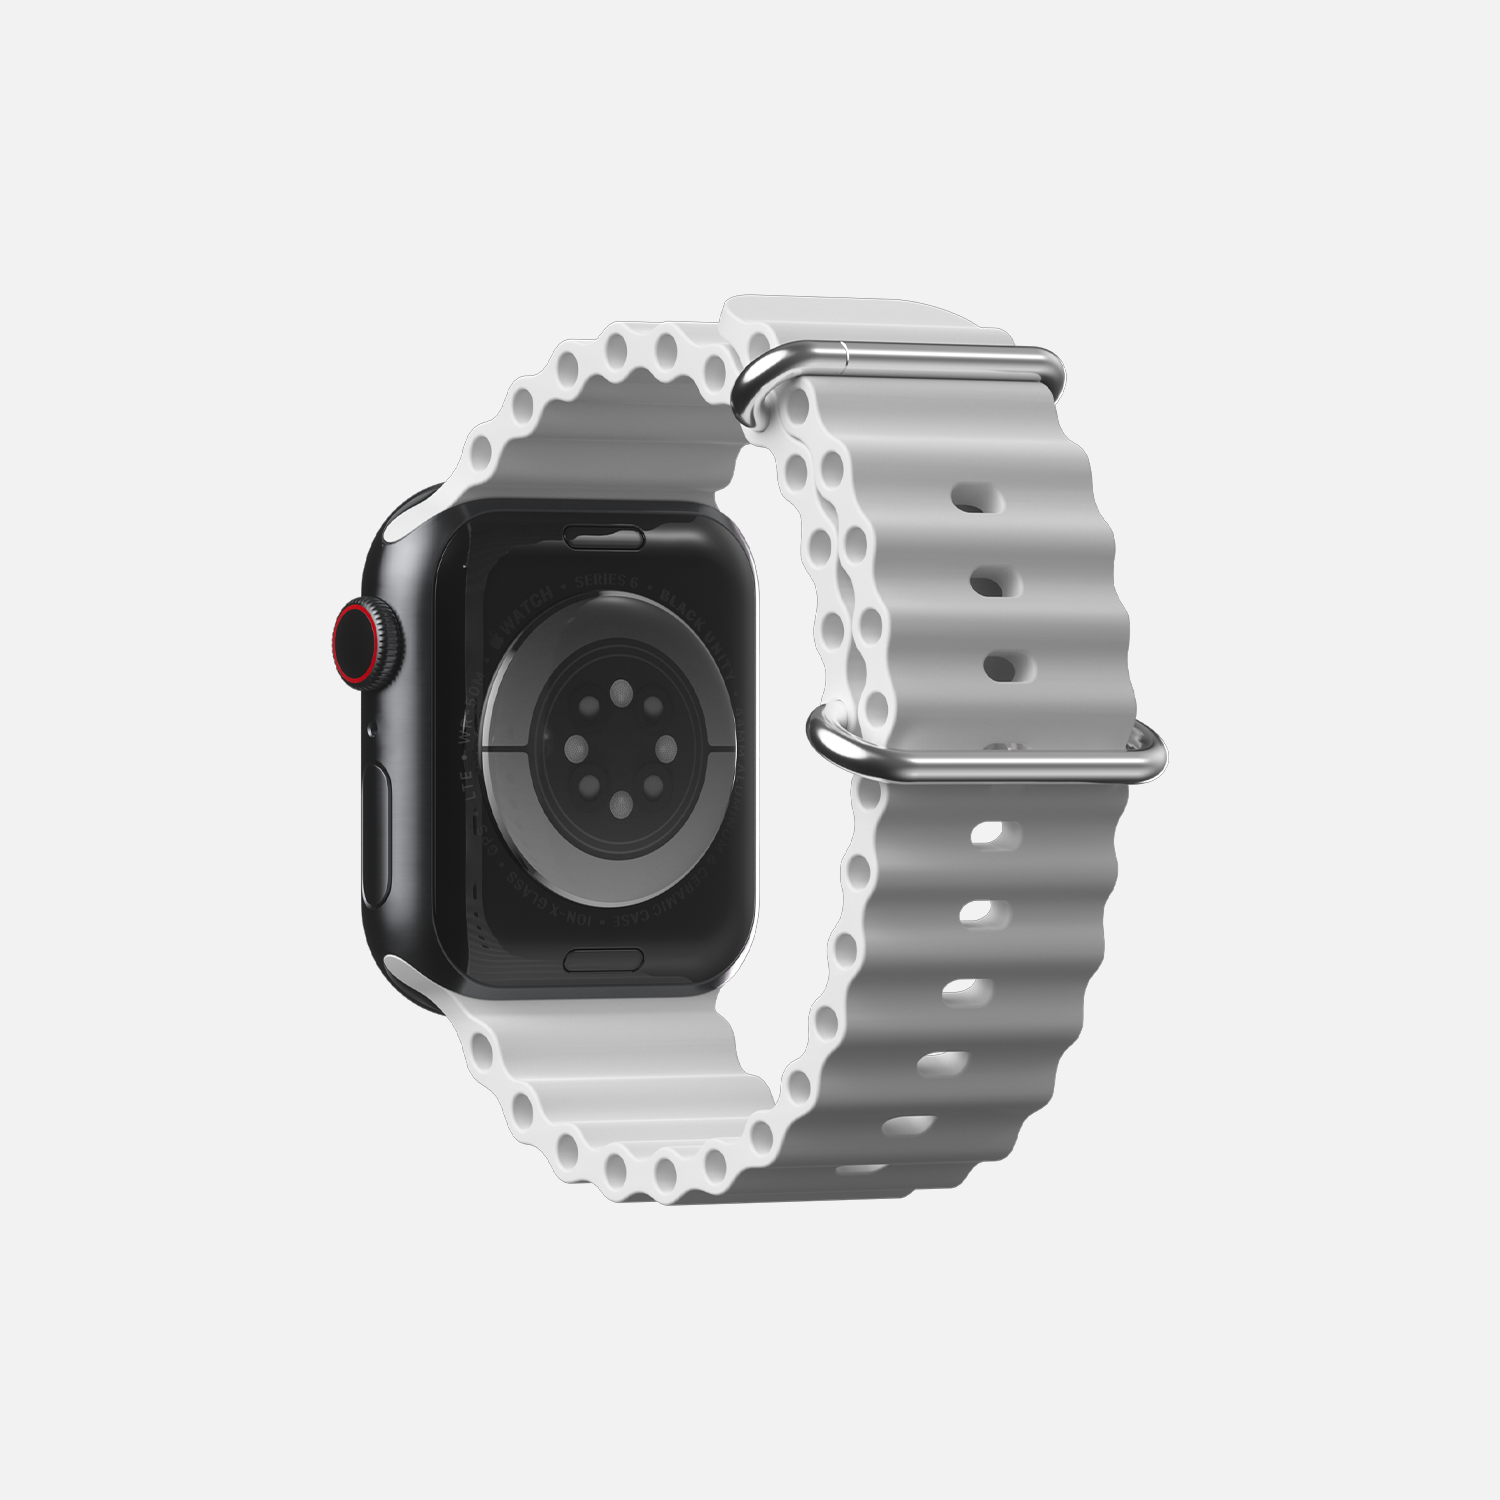 Silver smartwatch with sport white band isolated on white background.